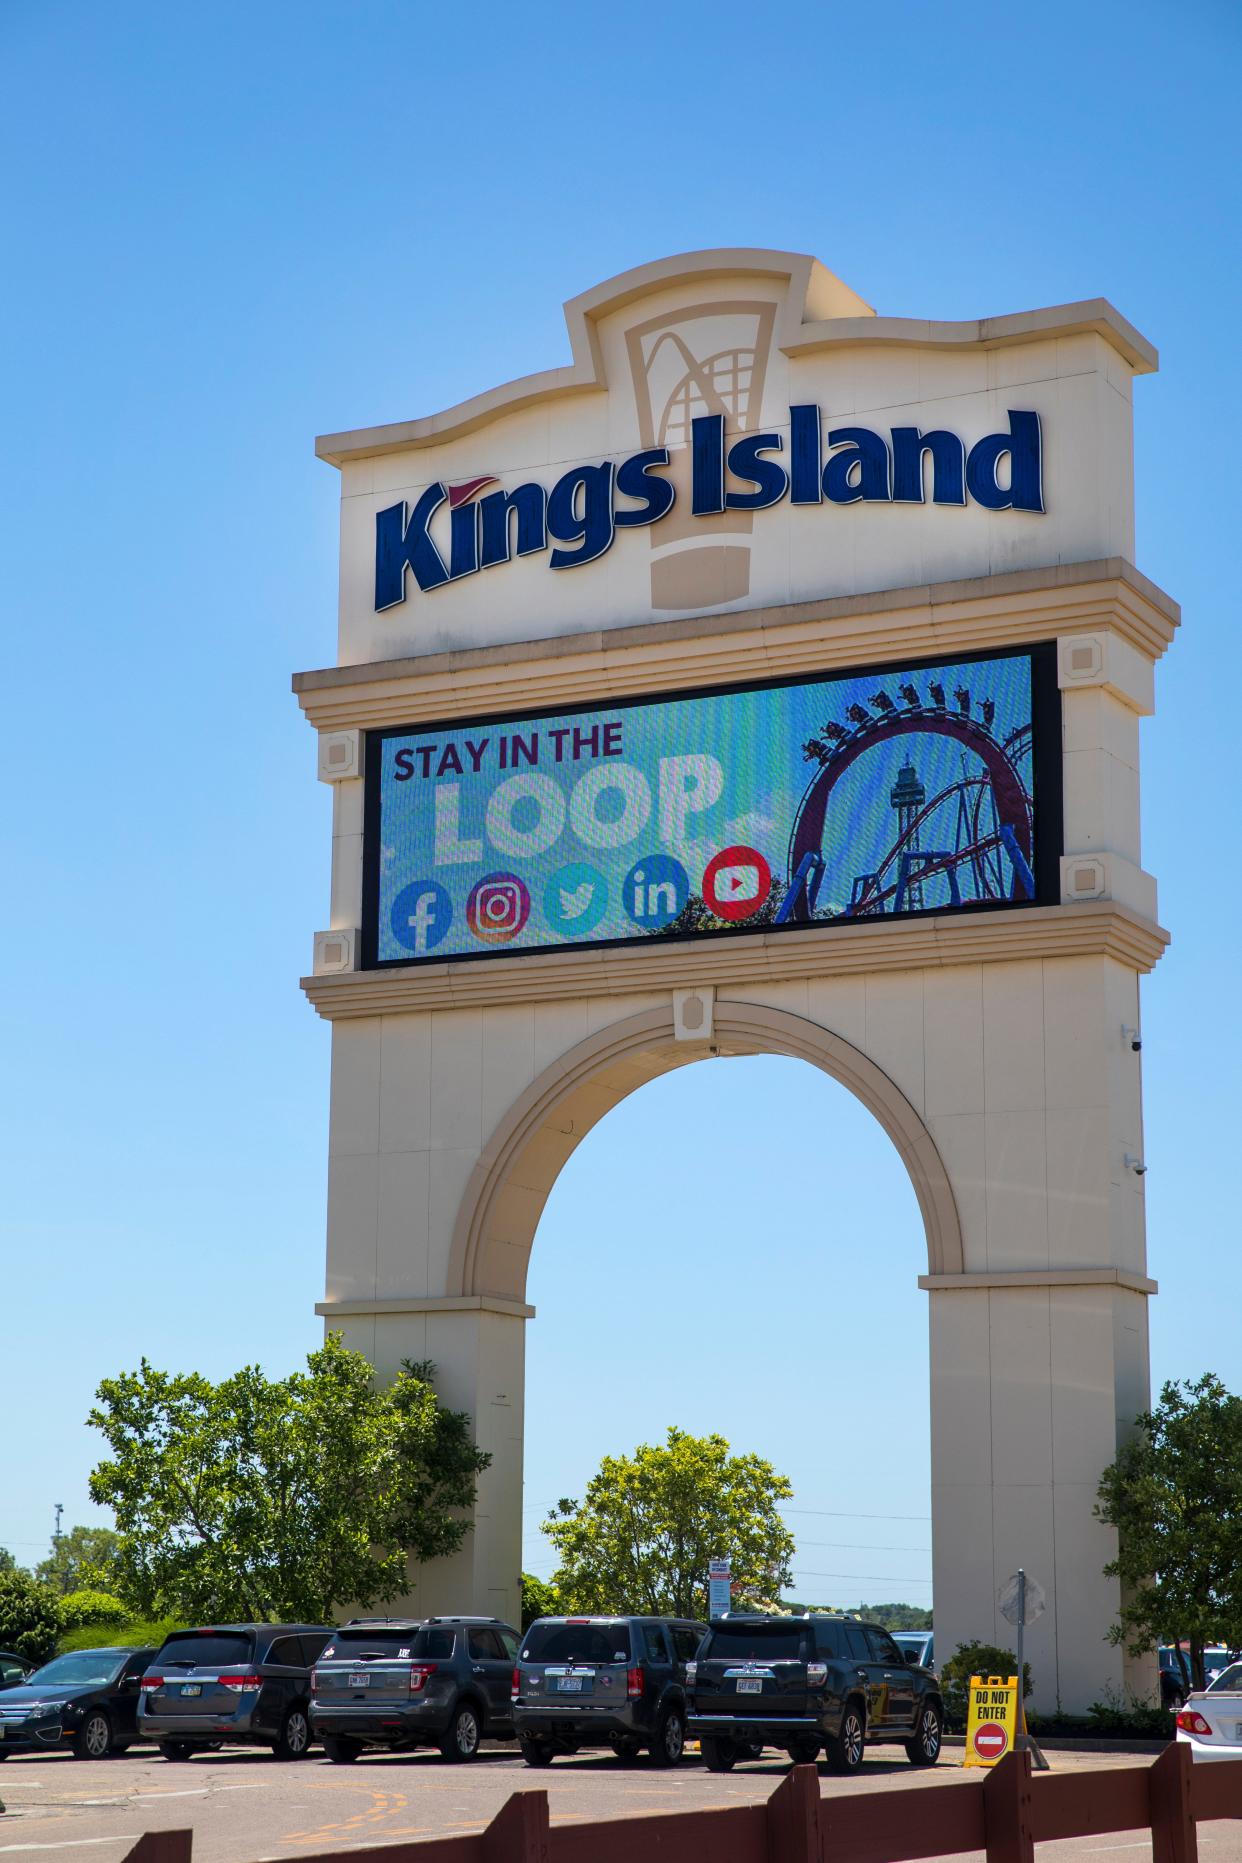 Operations were temporarily suspended in Kings Island's Action Zone Saturday night after Mason police received a report of a "suspicious person" outside the park.